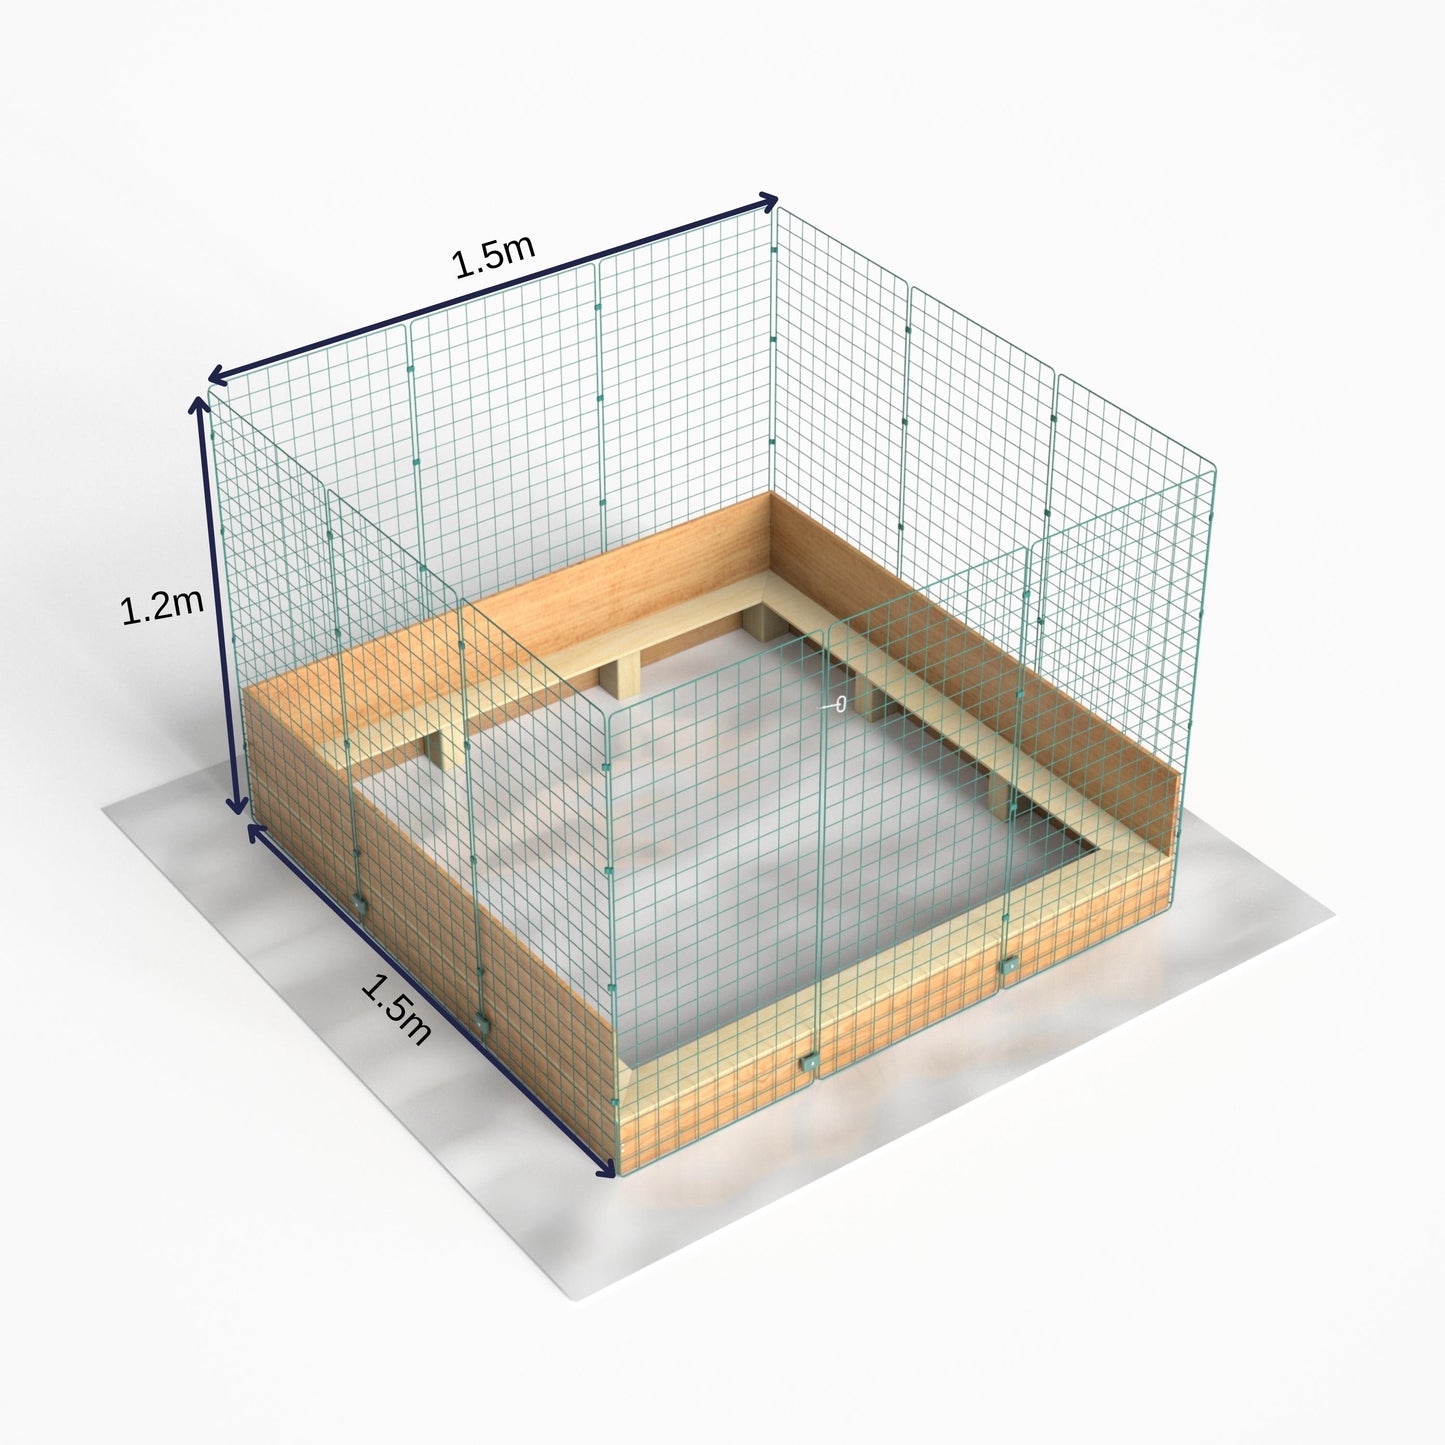 1.5m x 1.5m x 1.2m High Whelping Box (5ft x 5ft) For Large Dogs Puppies - With Pig Rails